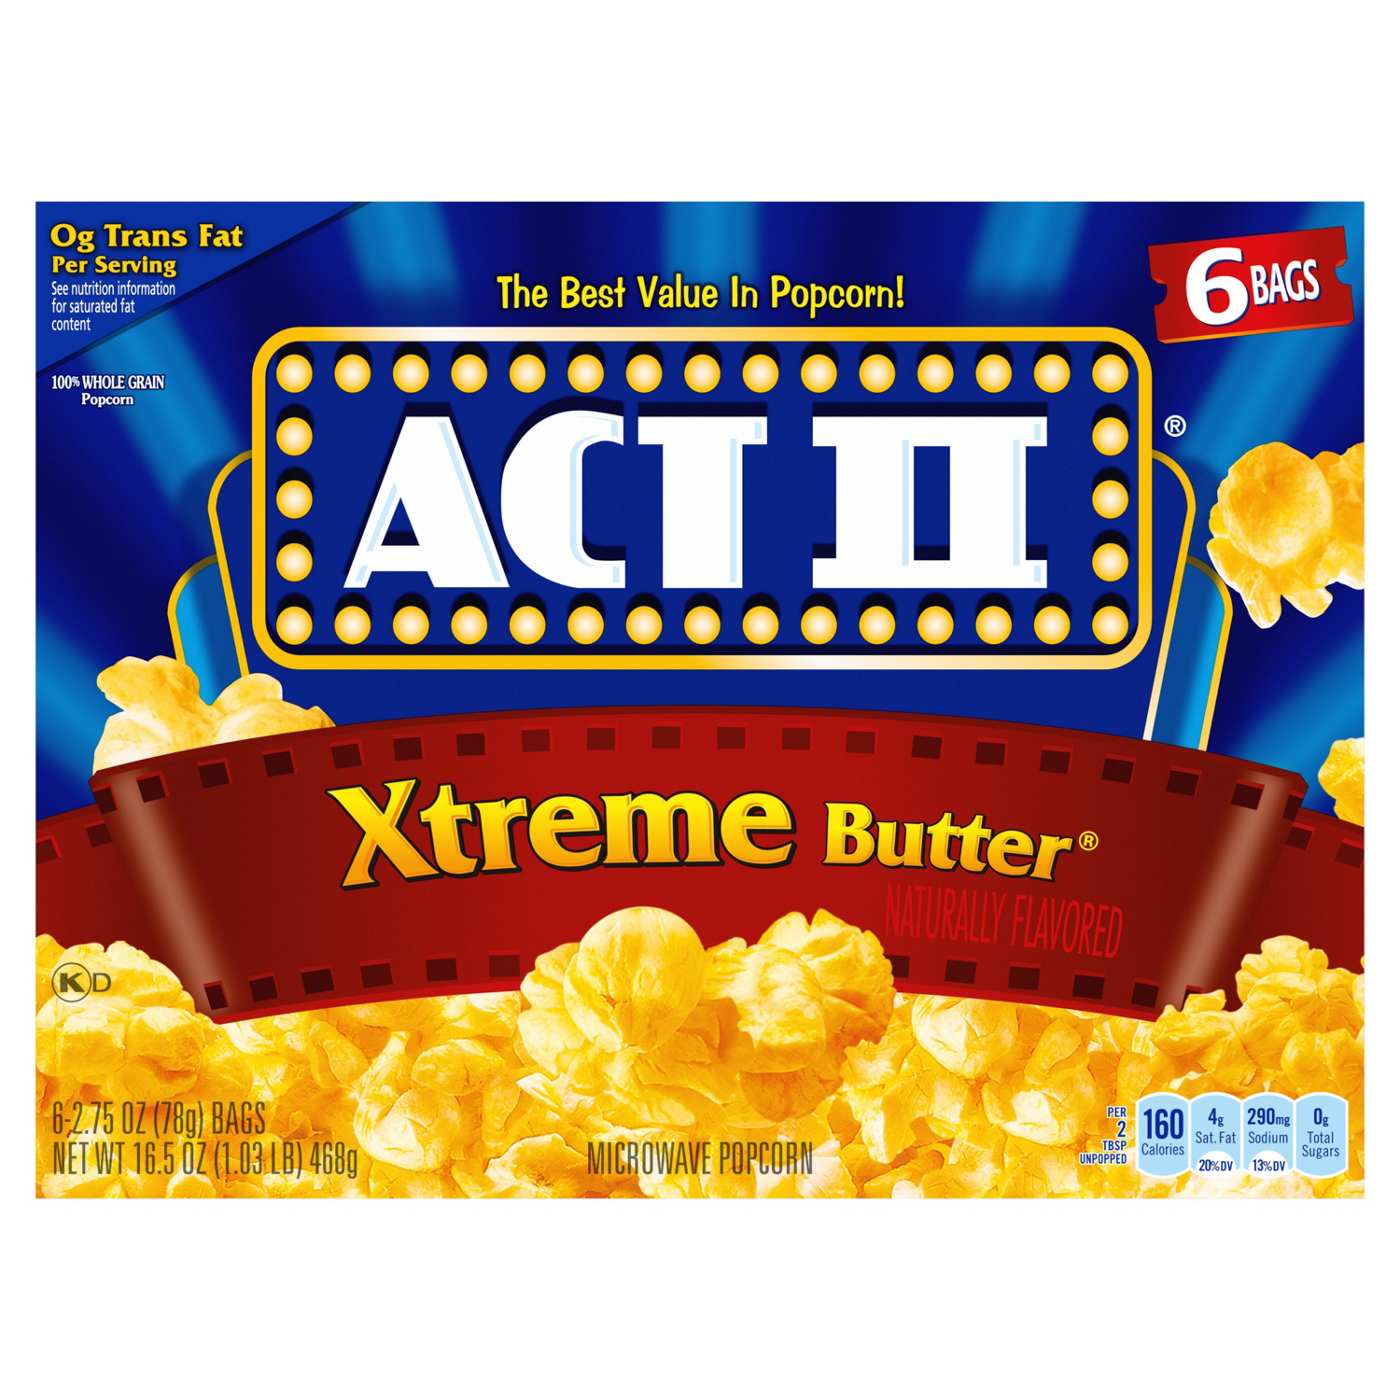 ACT II Xtreme Butter Microwave Popcorn; image 7 of 7